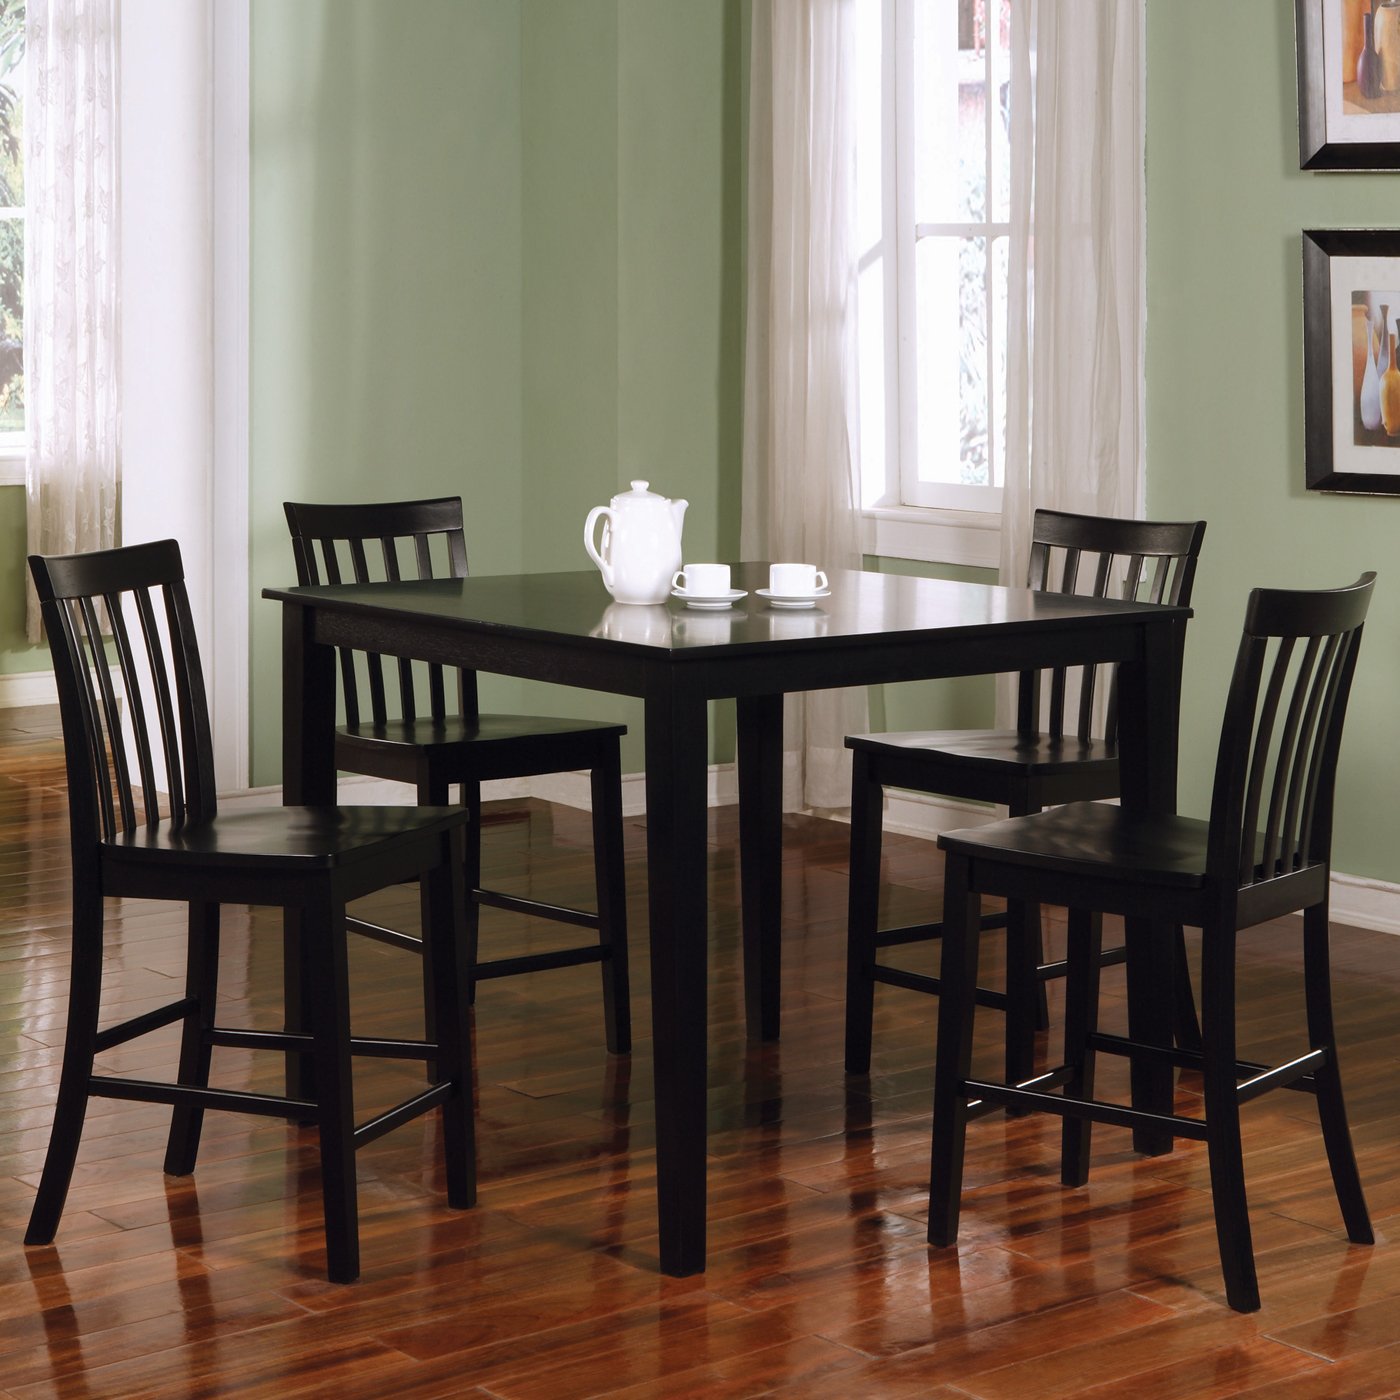 SOS ATG - COASTER FINE FURNITURE in the Dining Room Sets department at ...